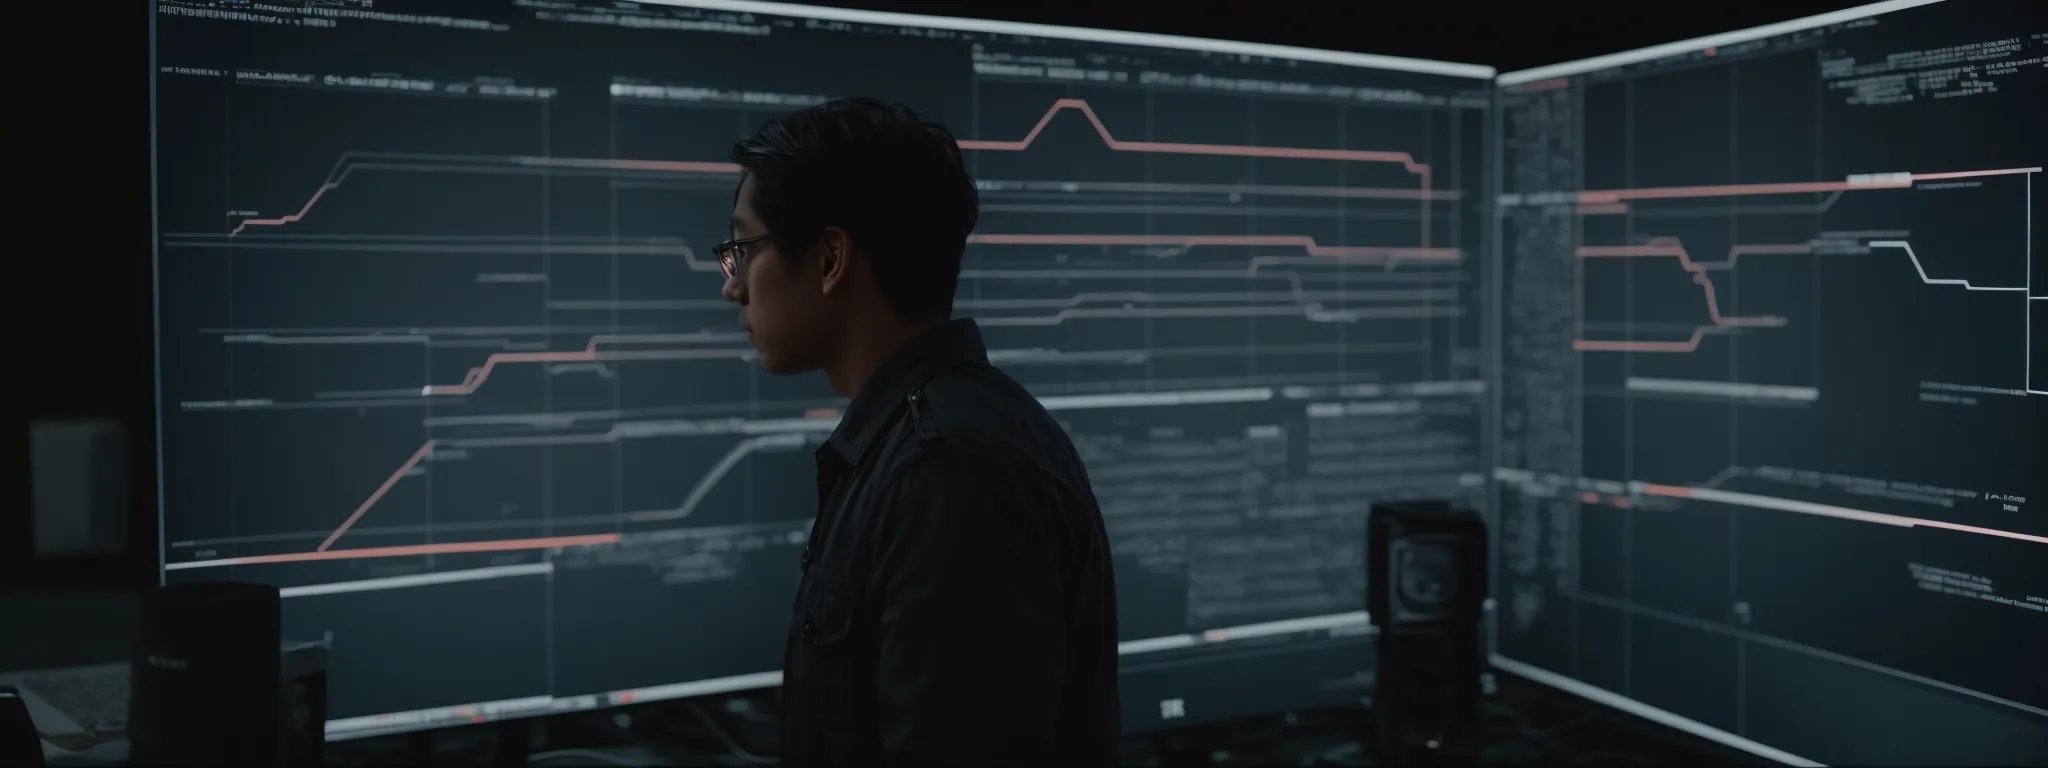 a focused individual gazes at a large monitor displaying a complex flowchart, symbolizing the resolution of redirect loops.